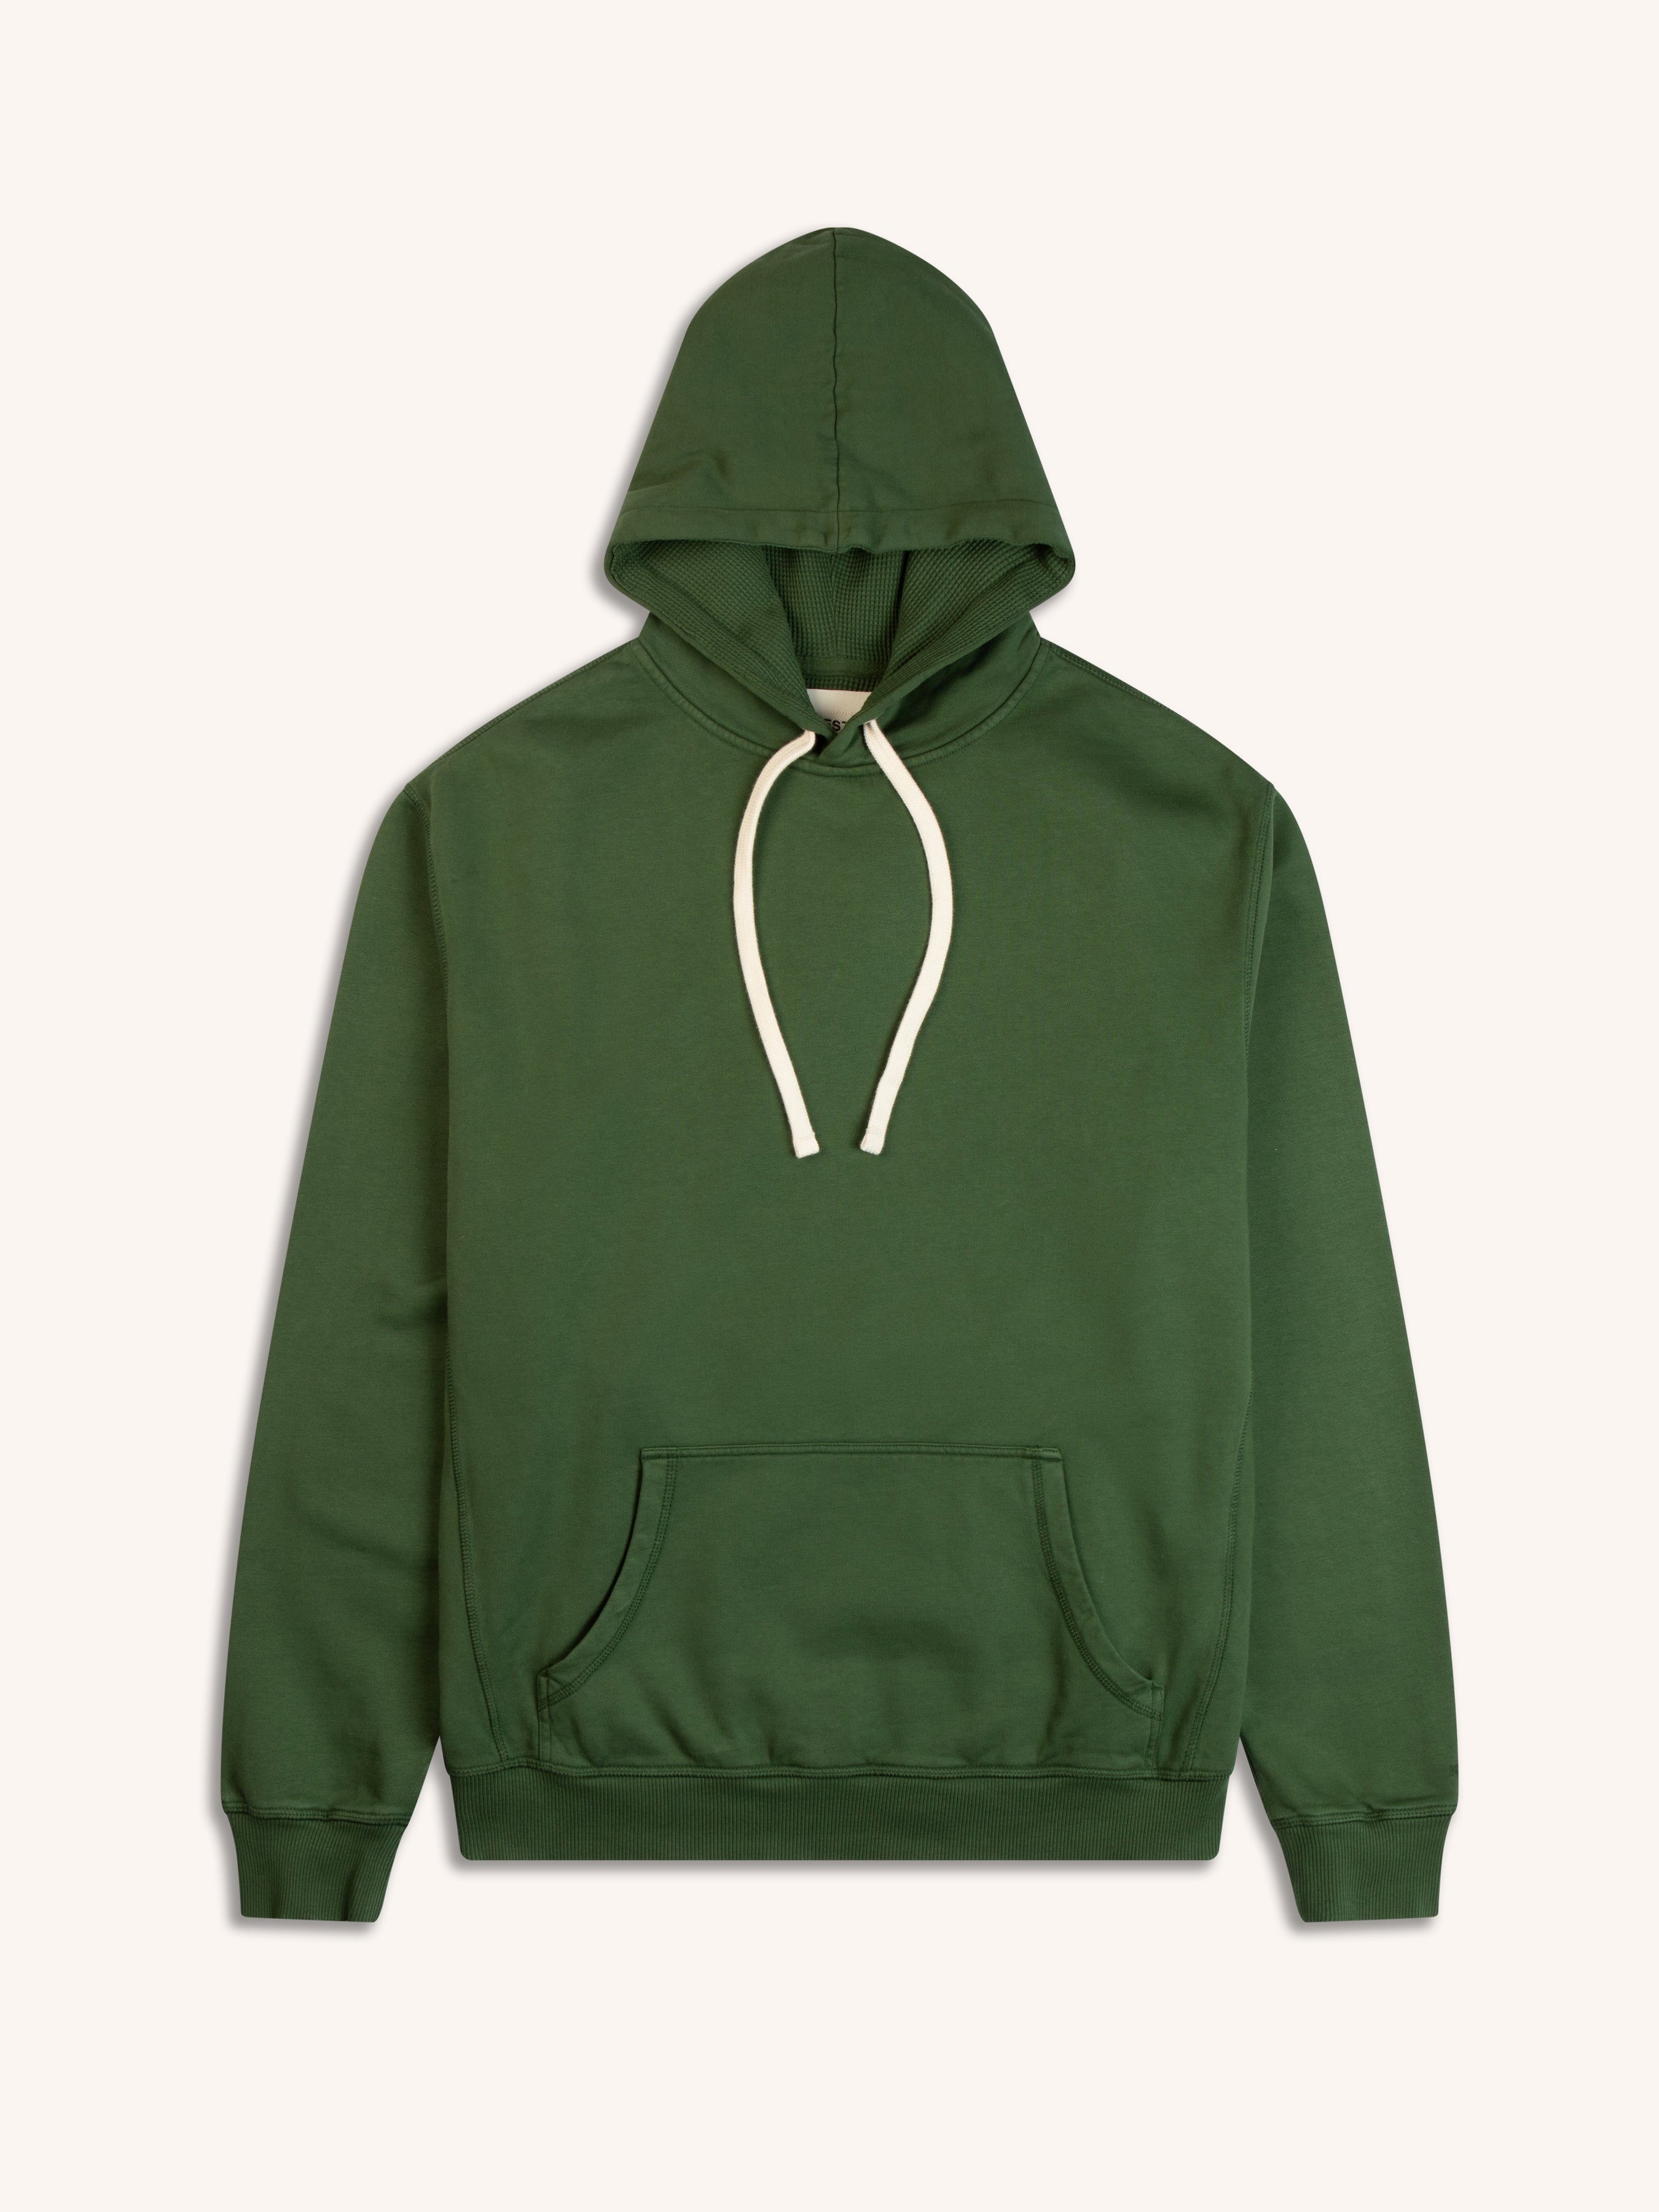 A pullover hoodie from Scottish menswear brand KESTIN, garment dyed in green, on a white background.